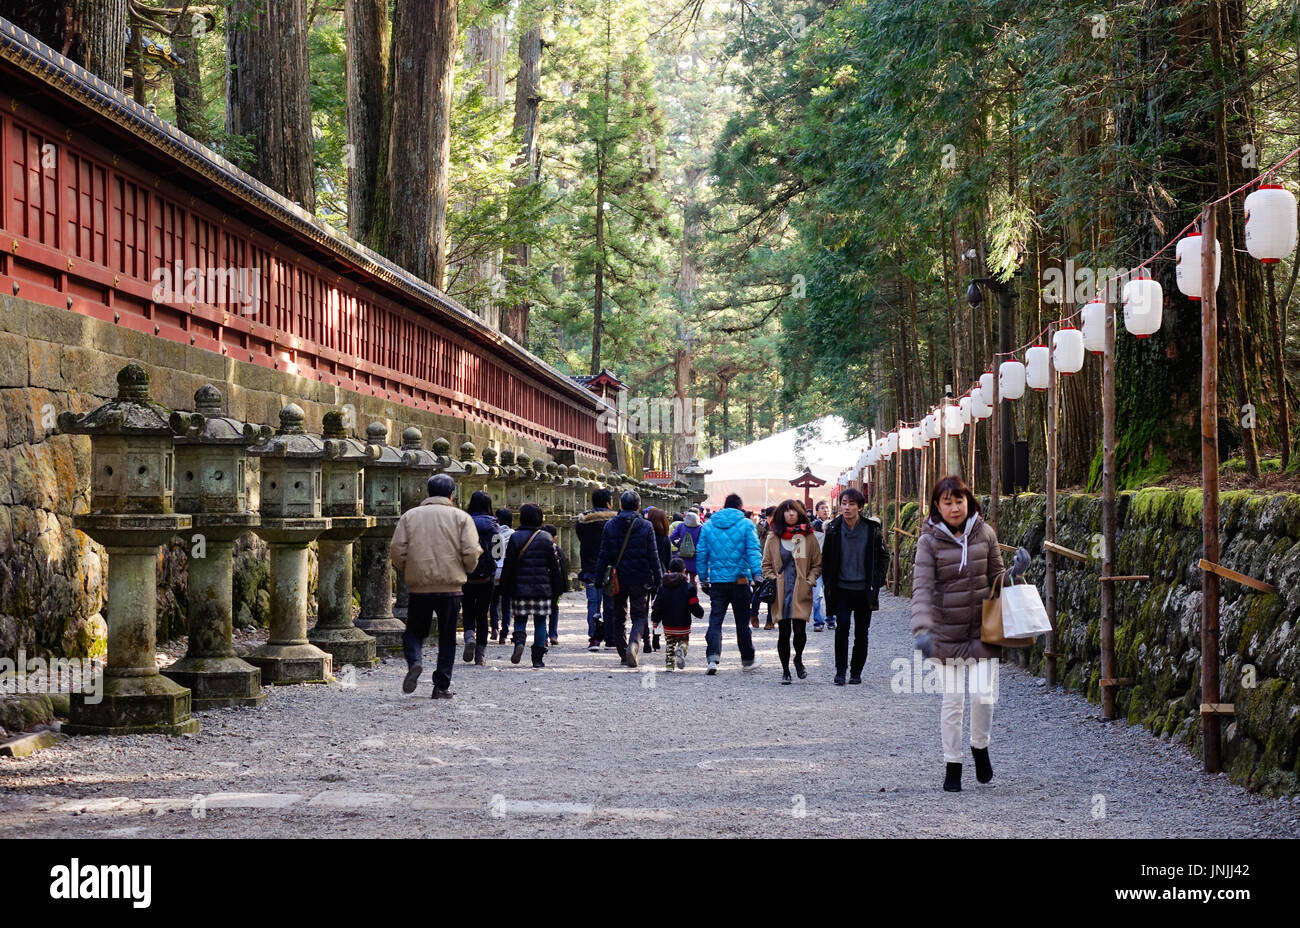 Nikko, Japan - Jan 2, 2016. People coming to the Toshogu Shrine in Nikko, Japan. Toshogu is a UNESCO Heritage site and are categorized as the National Stock Photo